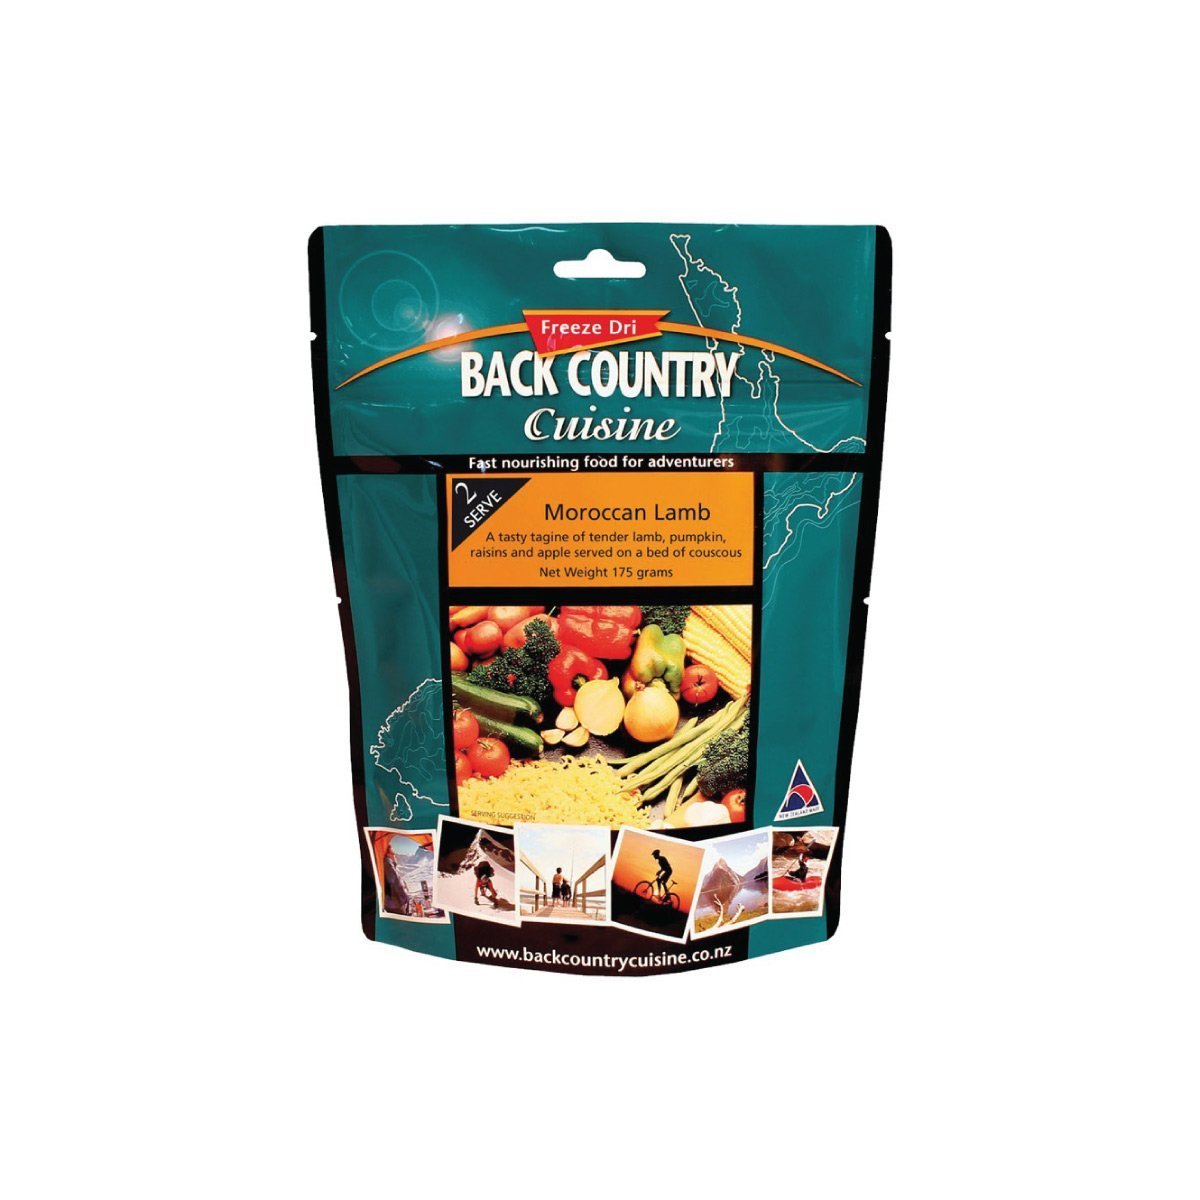 Back Country Cuisine Moroccan Lamb - Pack of 10 Outdoor and Survival Products Back Country Cuisine 2 Serve (175g) Tactical Gear Supplier Tactical Distributors Australia